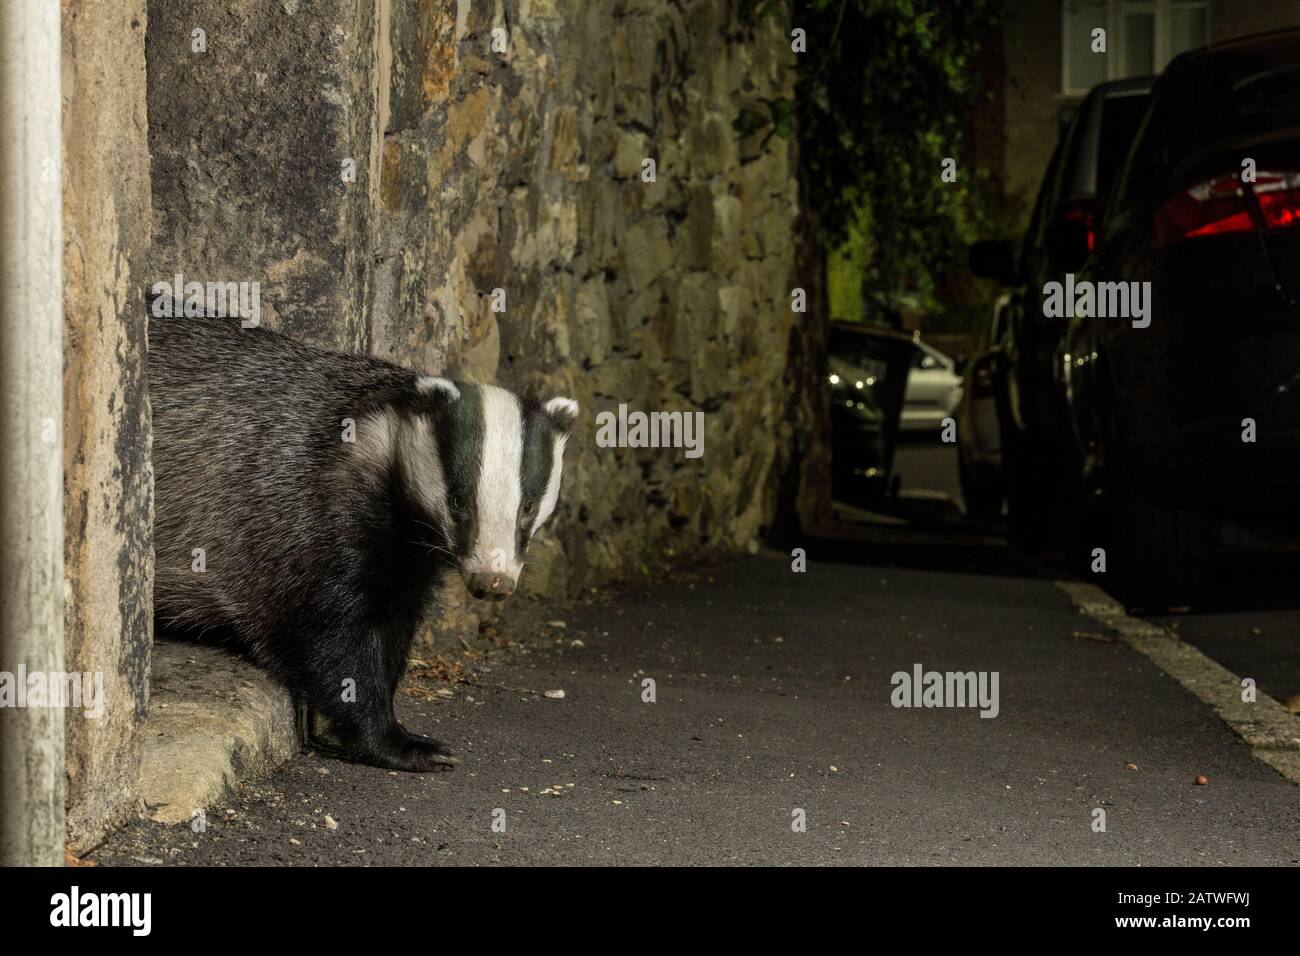 Badger (Meles meles) emerging through gateway in wall at night. In urban area, Sheffield, England, UK. October 2018. Stock Photo